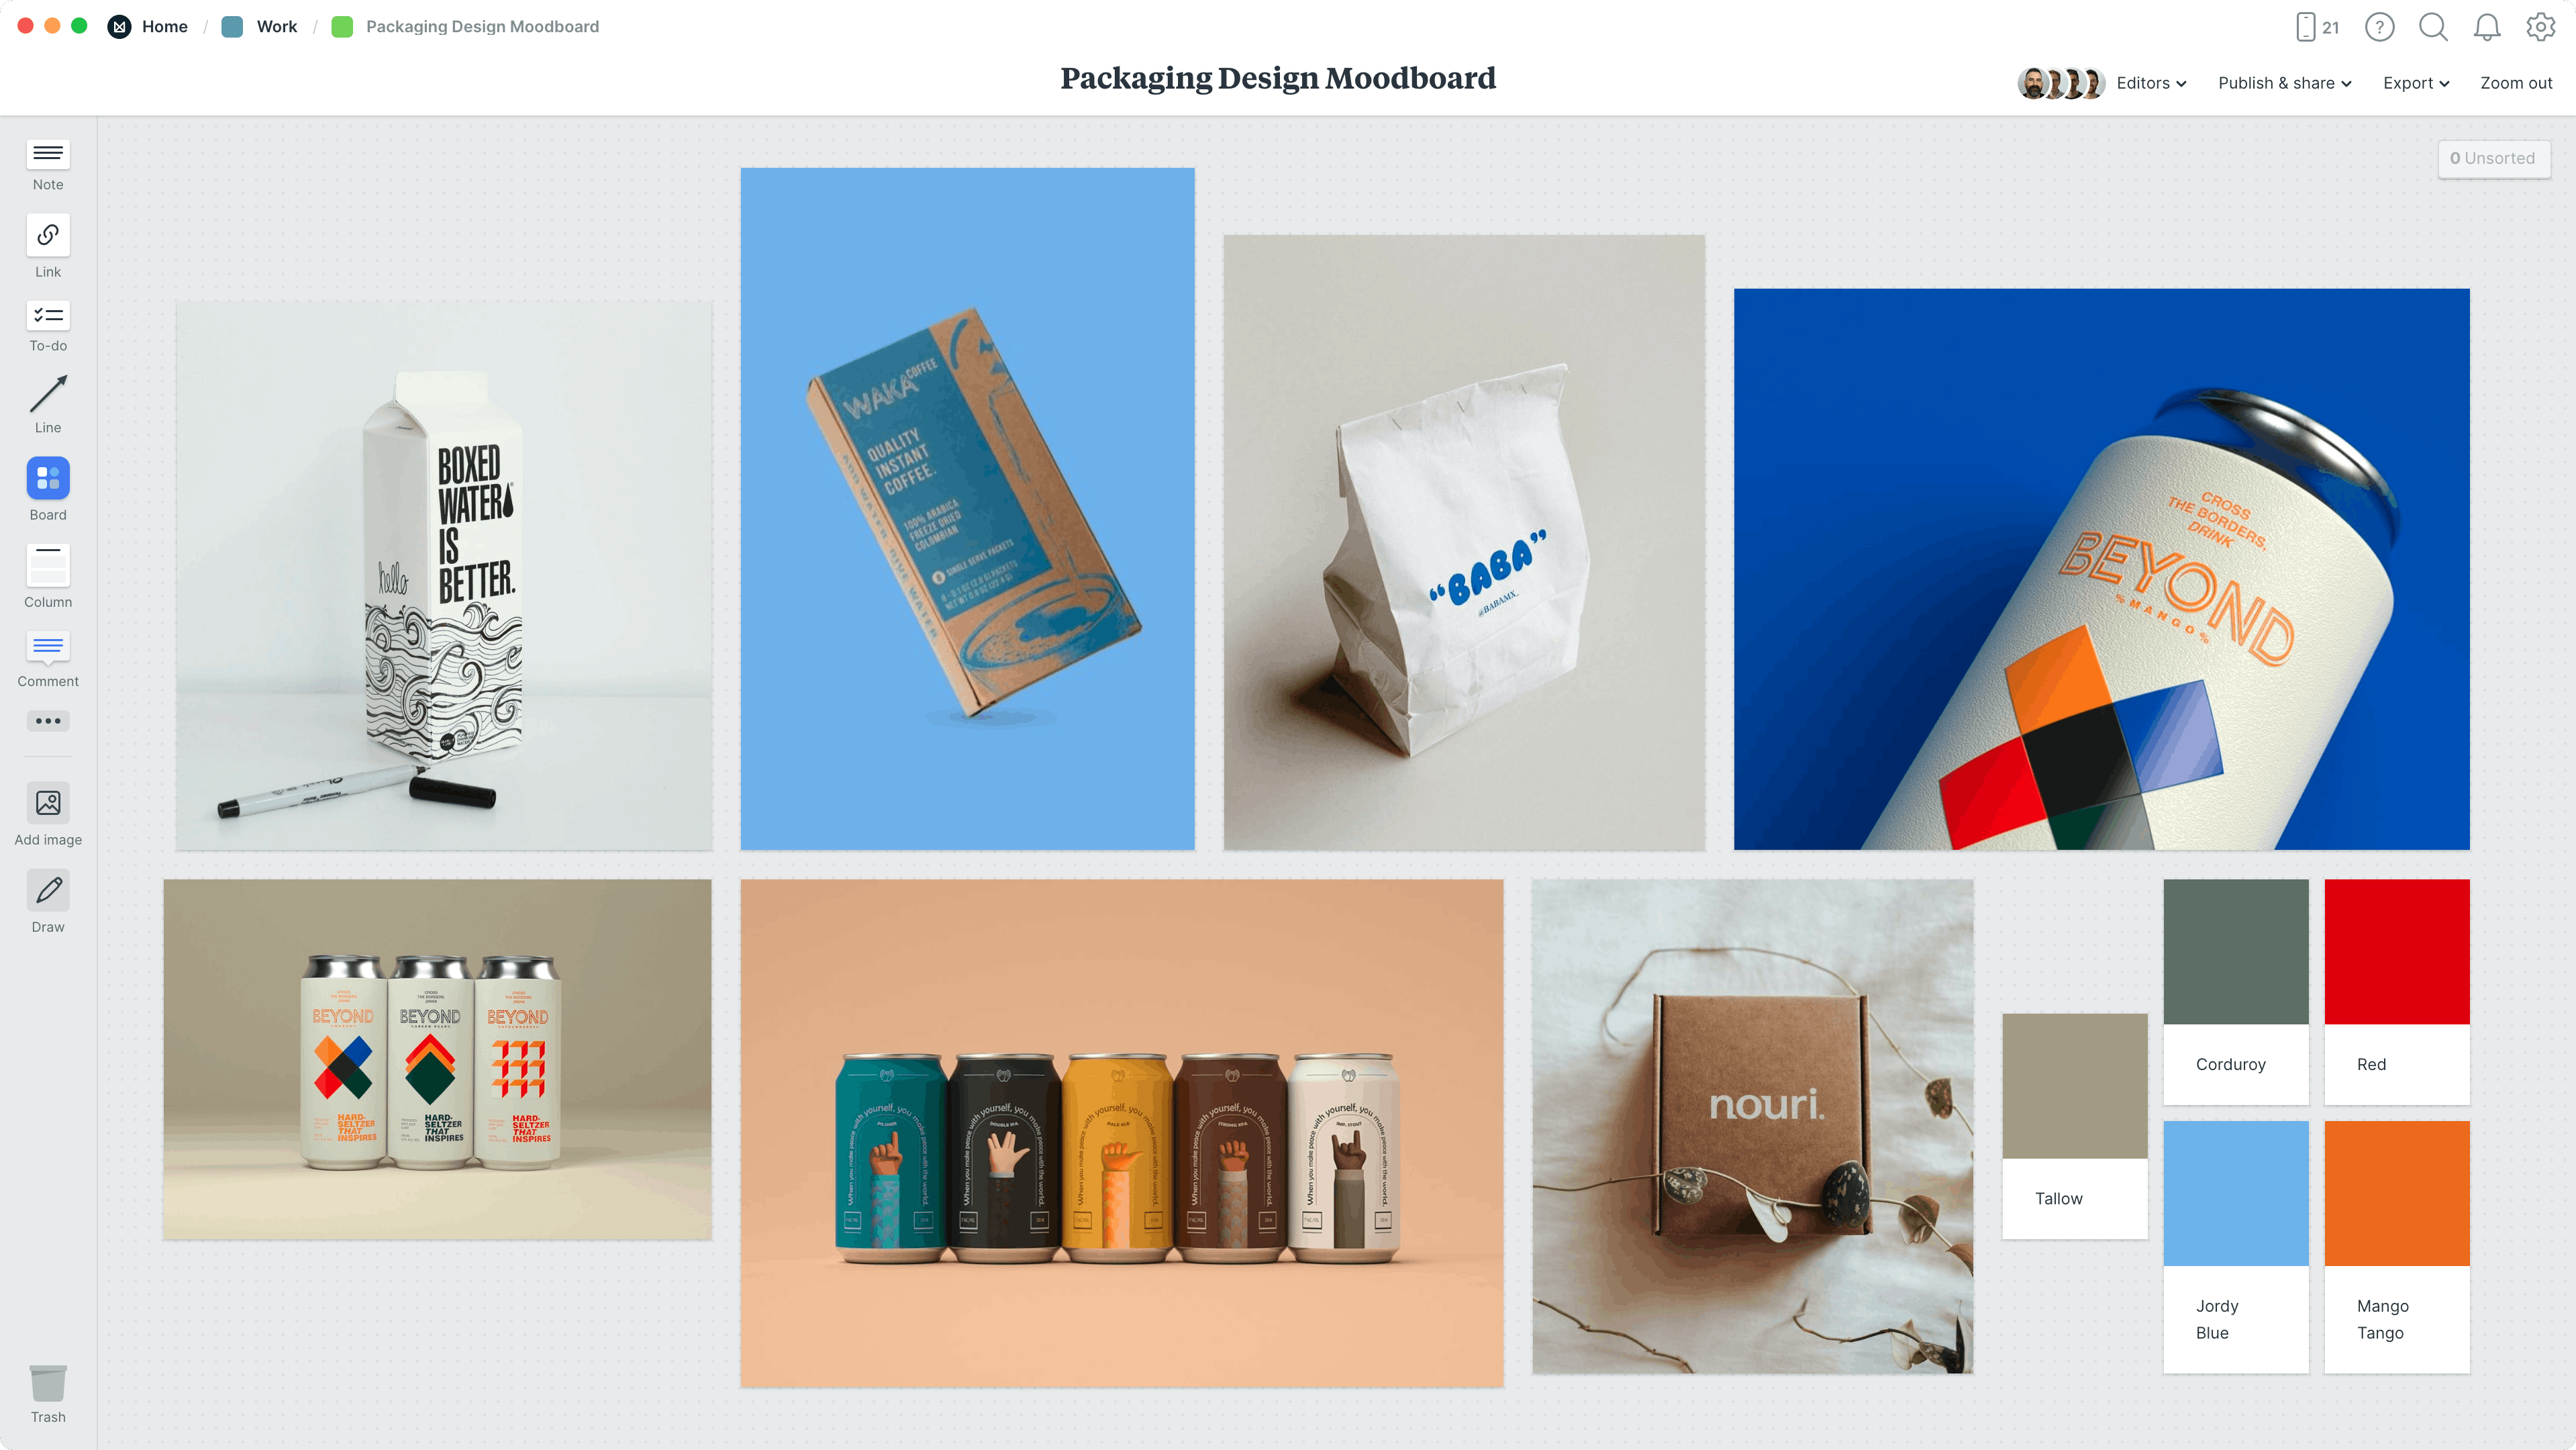 Packaging Design Moodboard Template, within the Milanote app